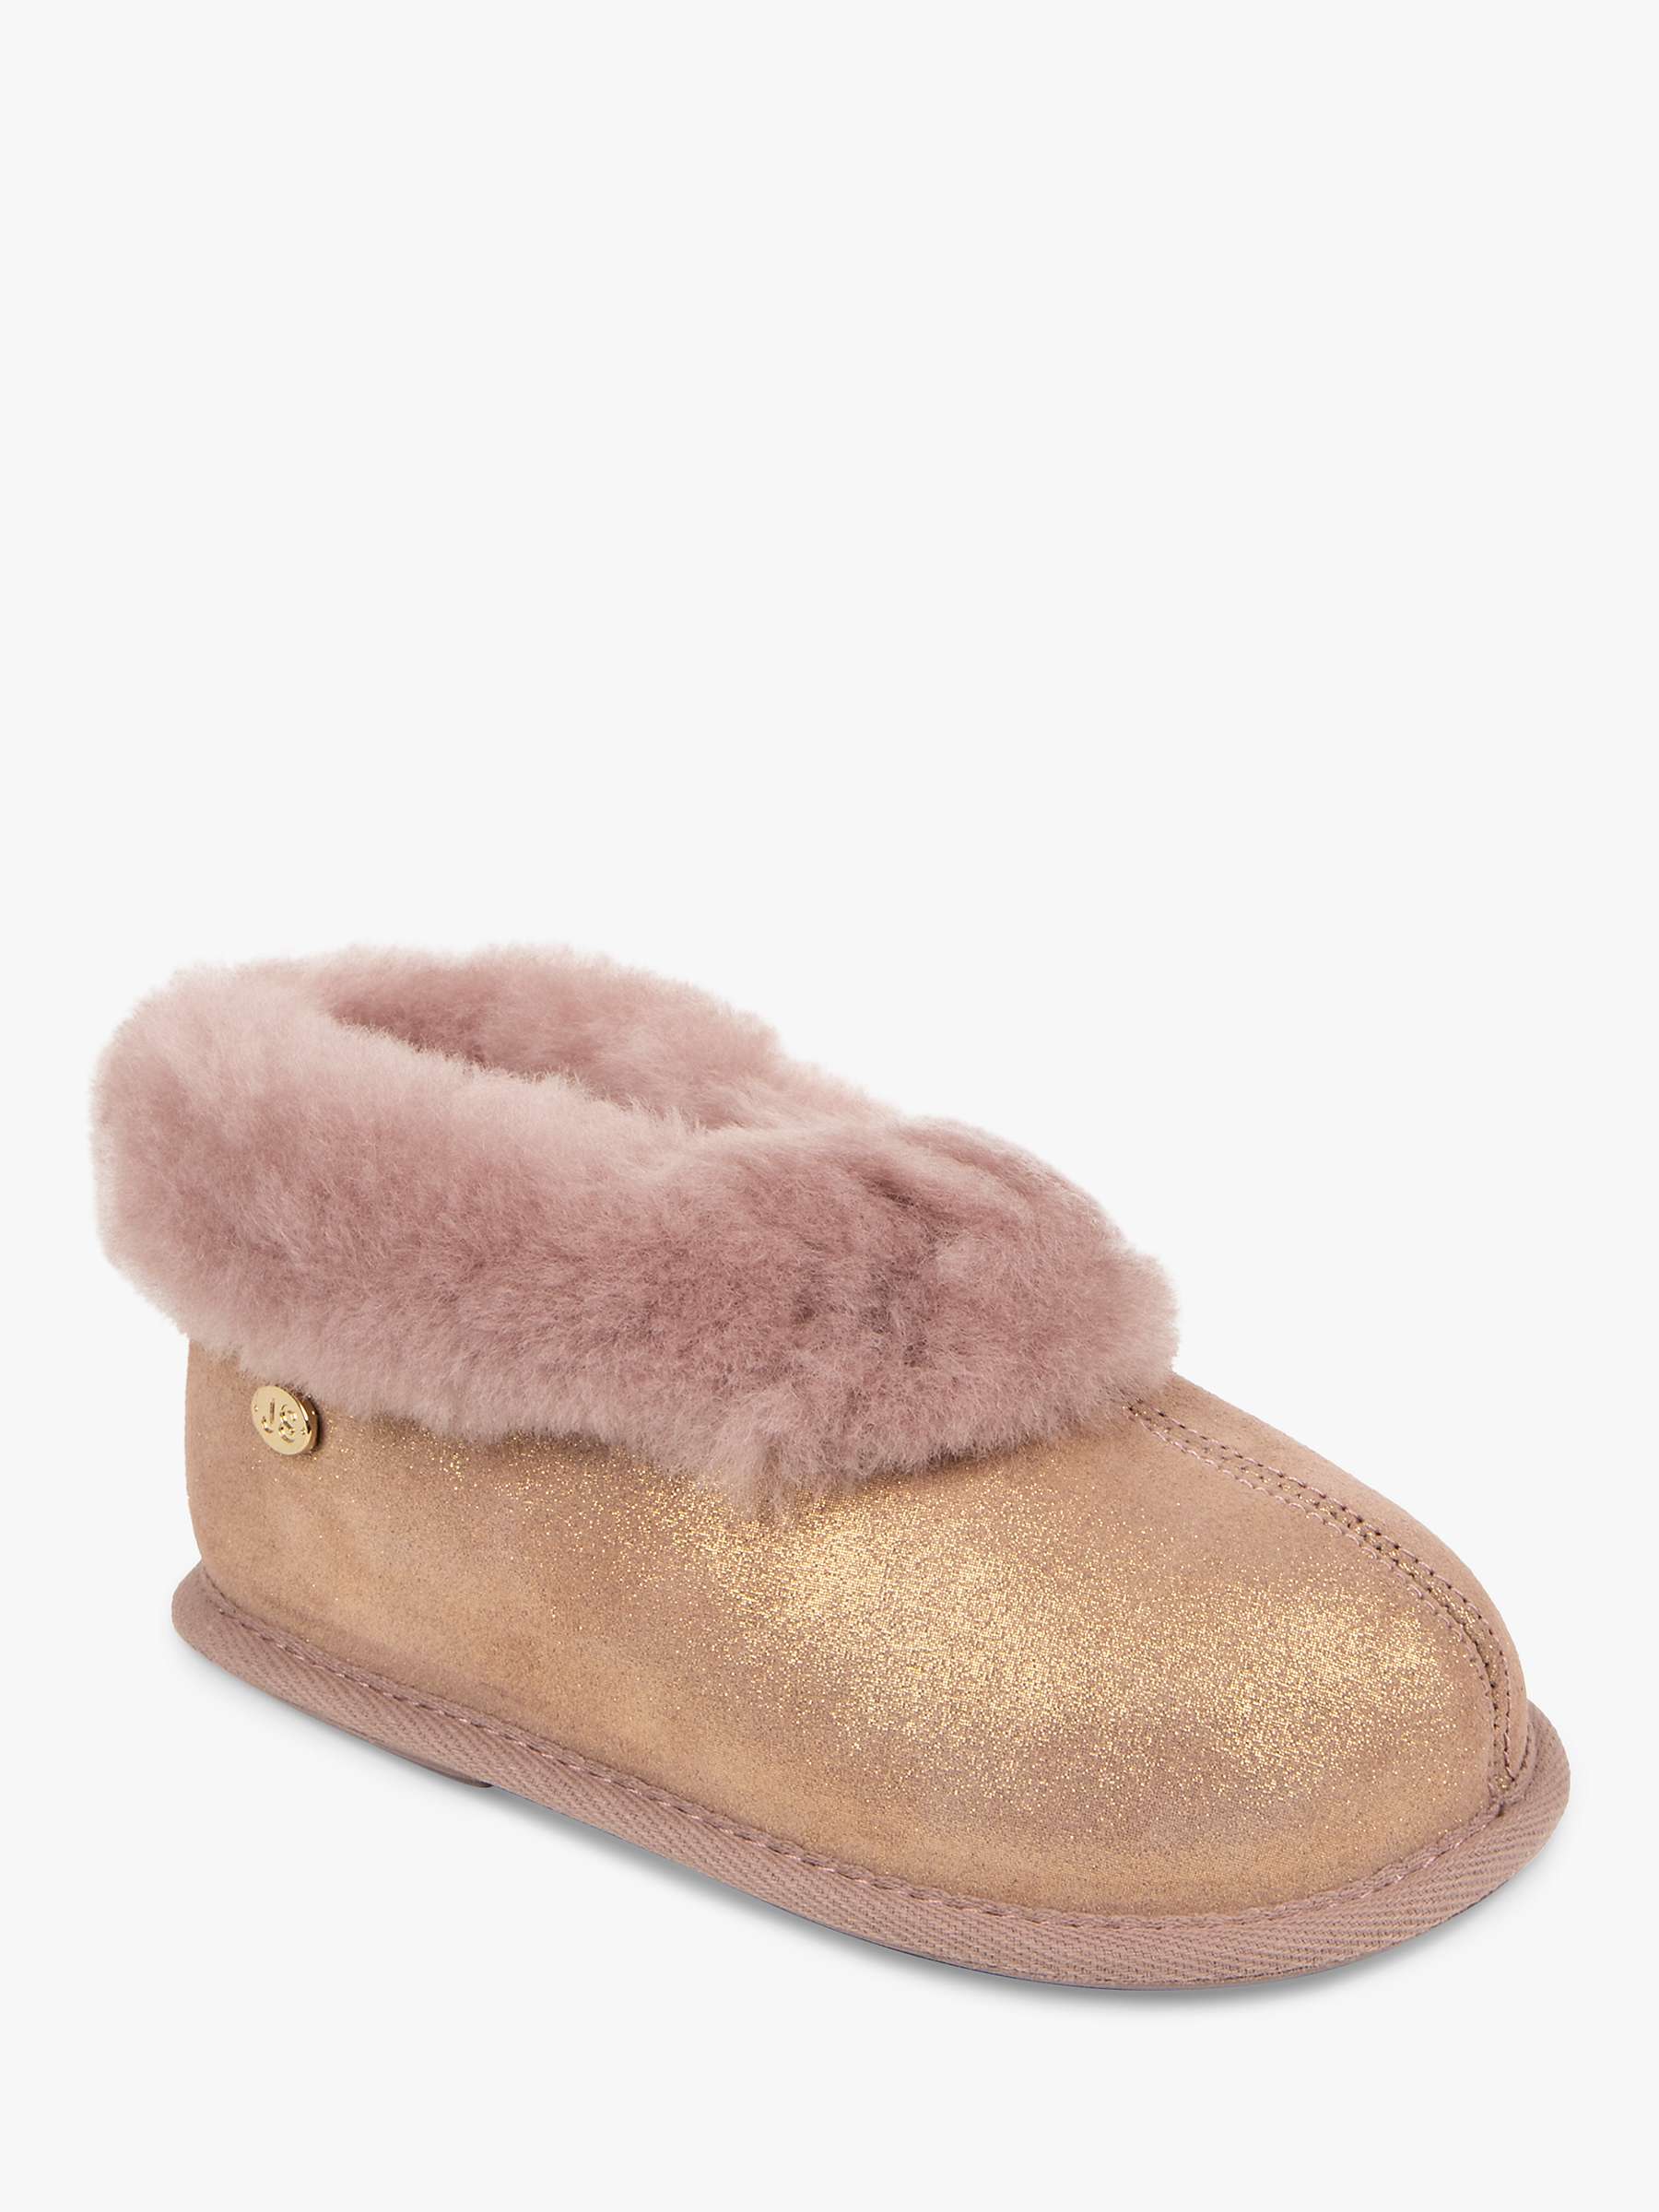 Buy Just Sheepskin Kids' Classic Boot Slippers Online at johnlewis.com